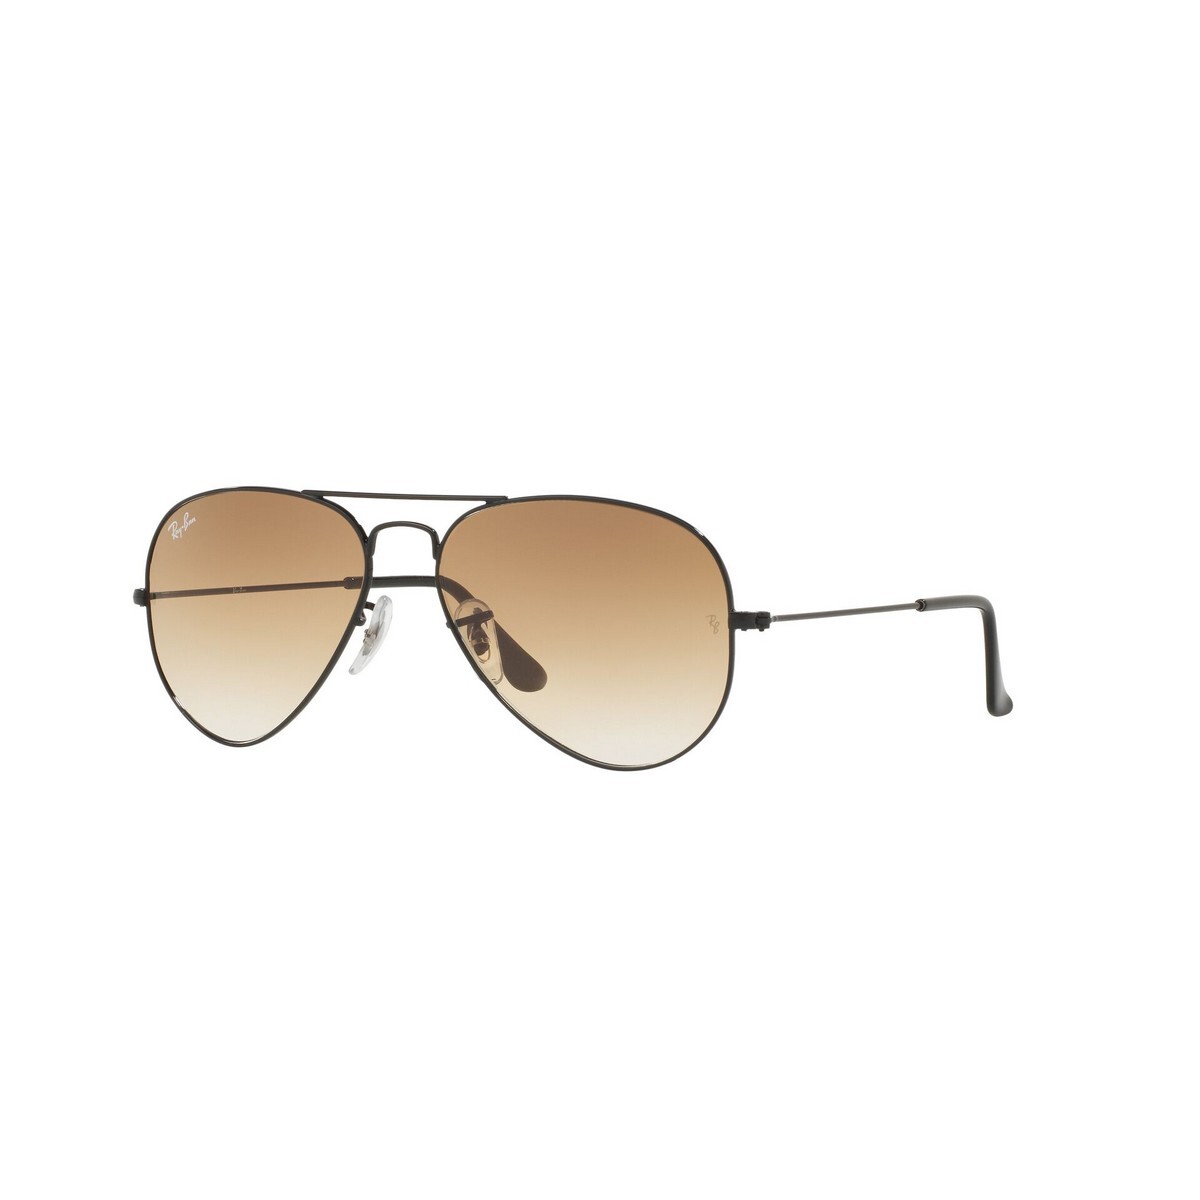 Rayban Unisex COL.002/51 frame With Clear Gradient Brown Lens Sunglass